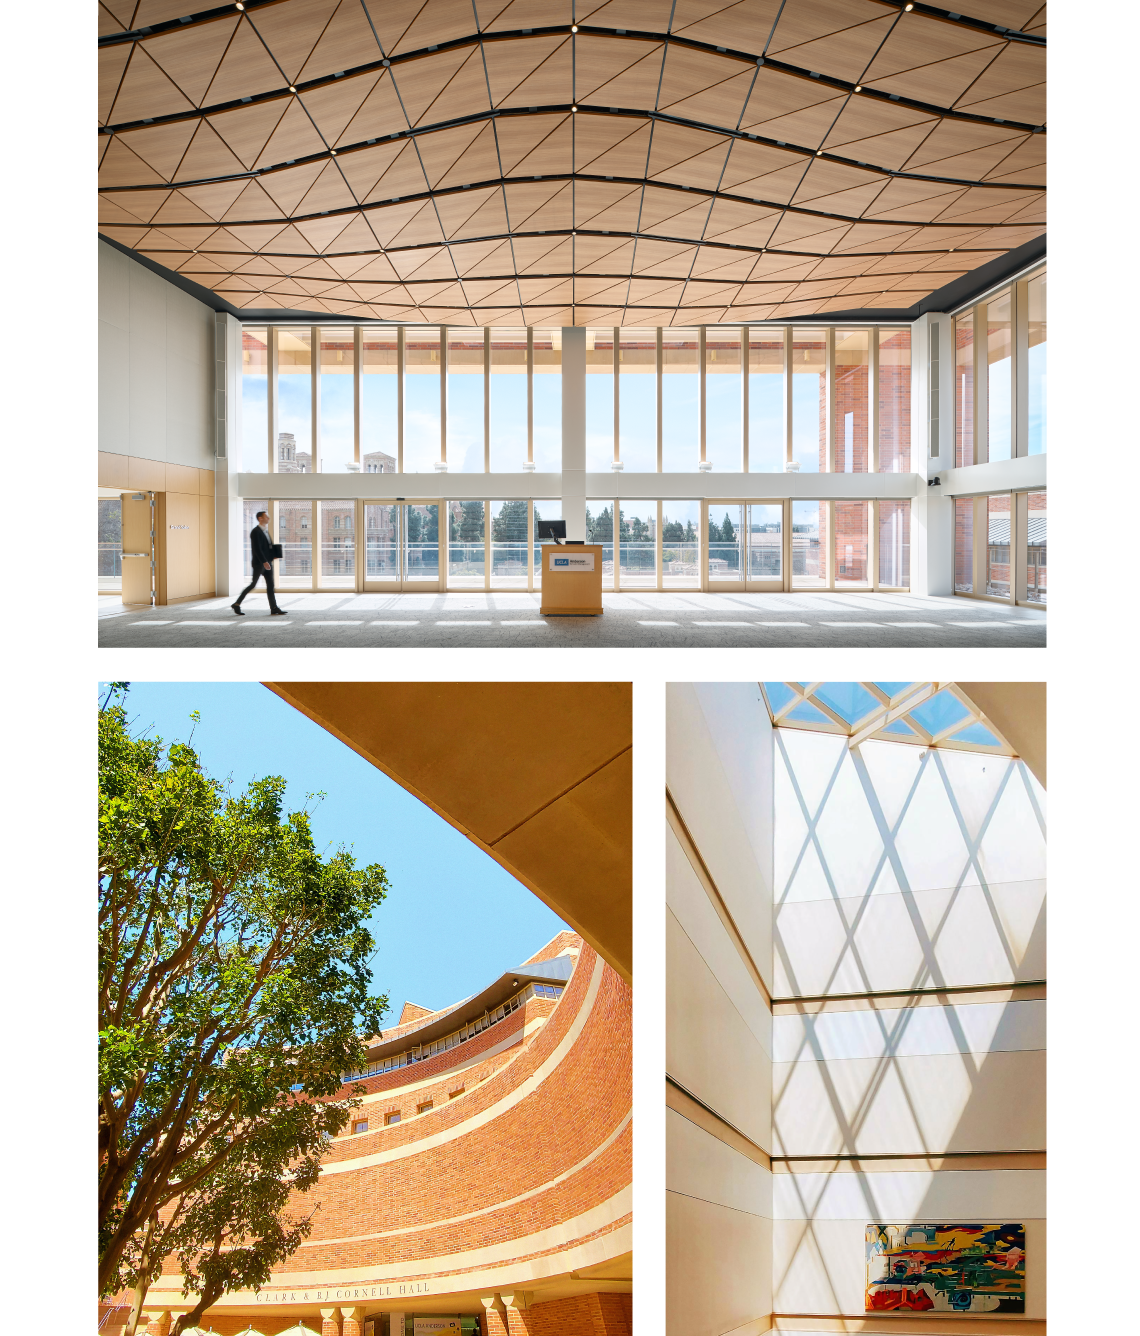 UCLA Anderson School of Management – Los Angeles